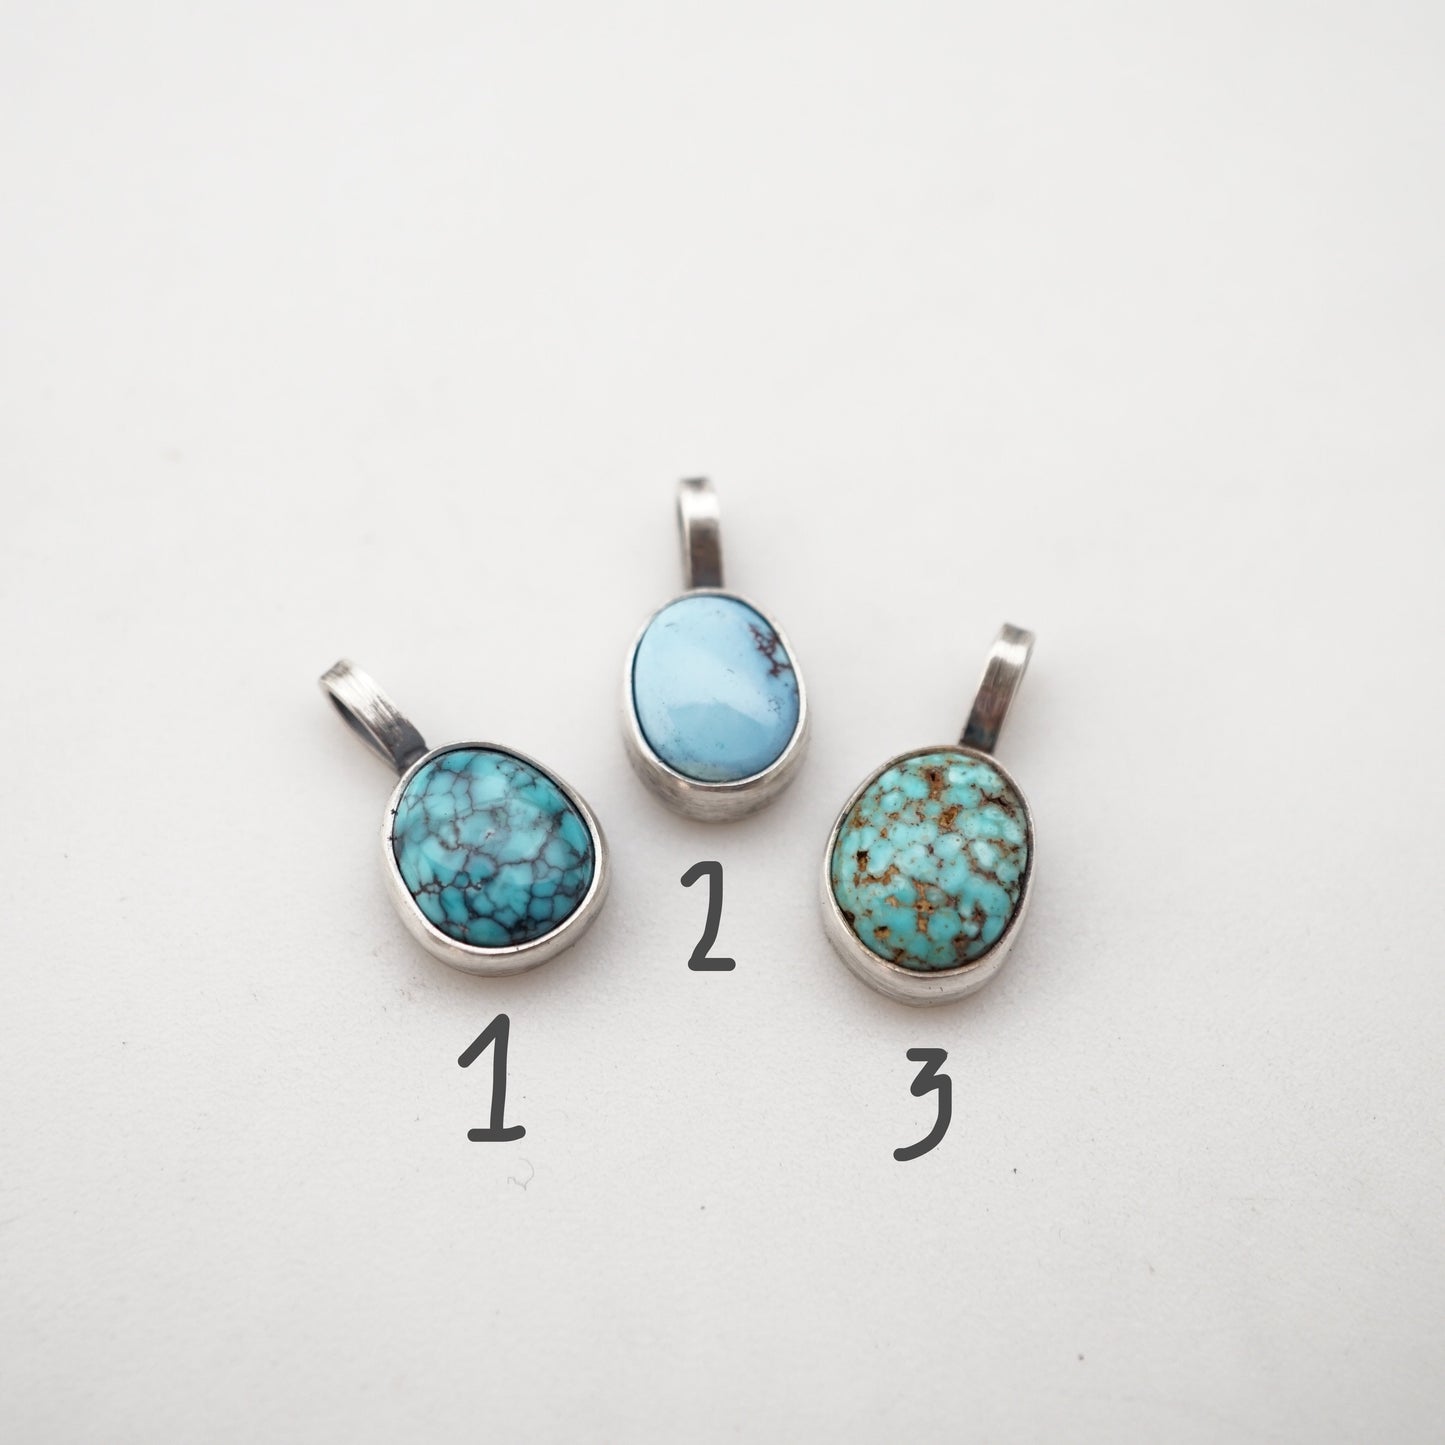 high grade turquoise pebble charms - no chain included - Lumenrose